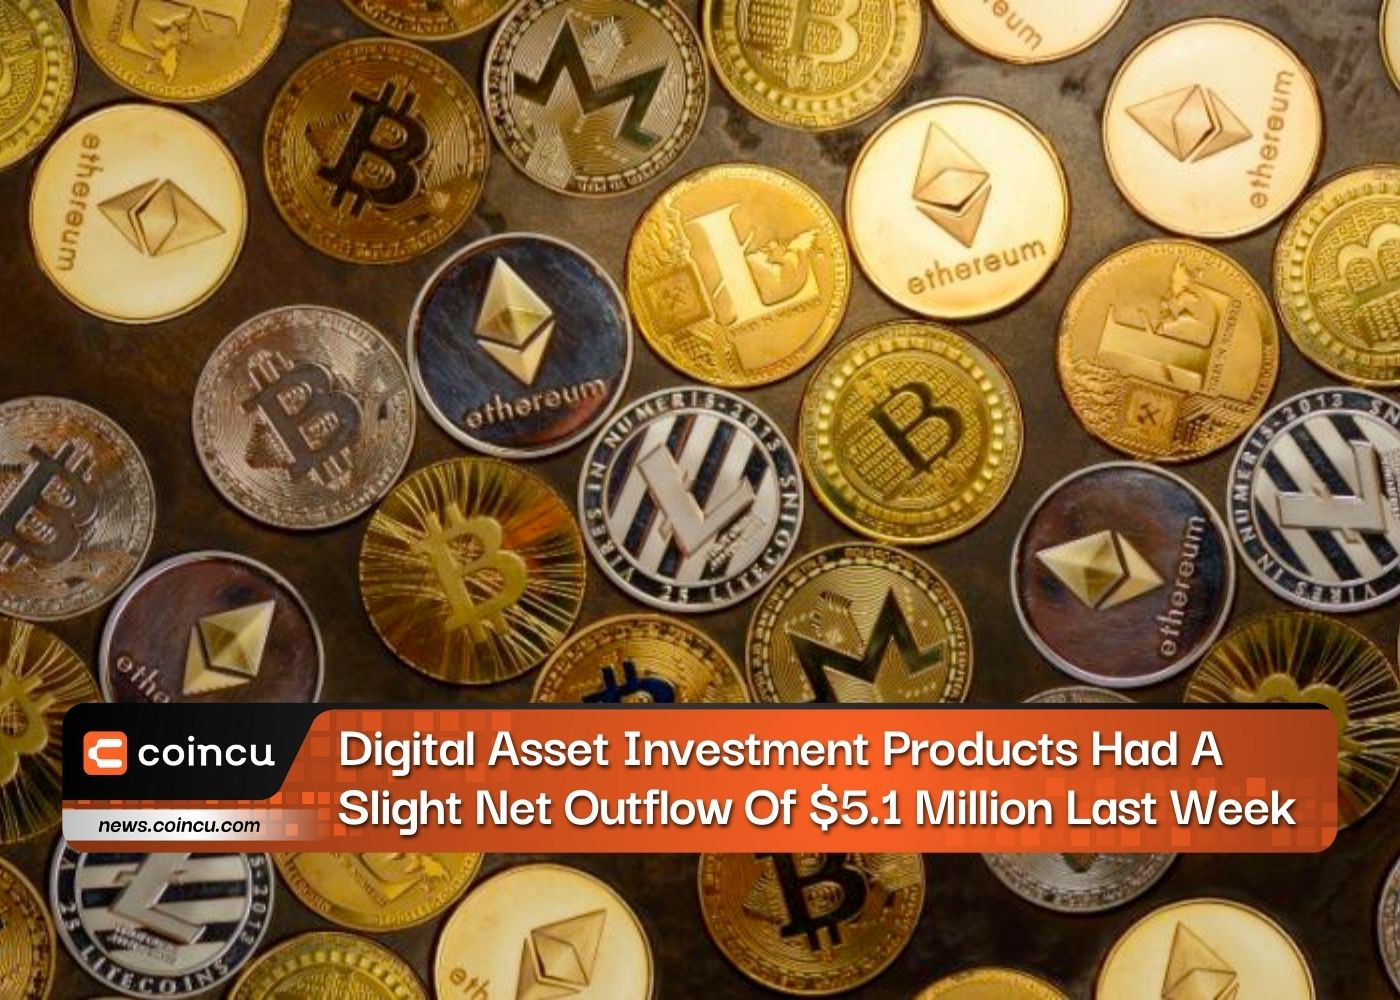 Digital Asset Investment Products Had A Slight Net Outflow Of $5.1 Million Last Week